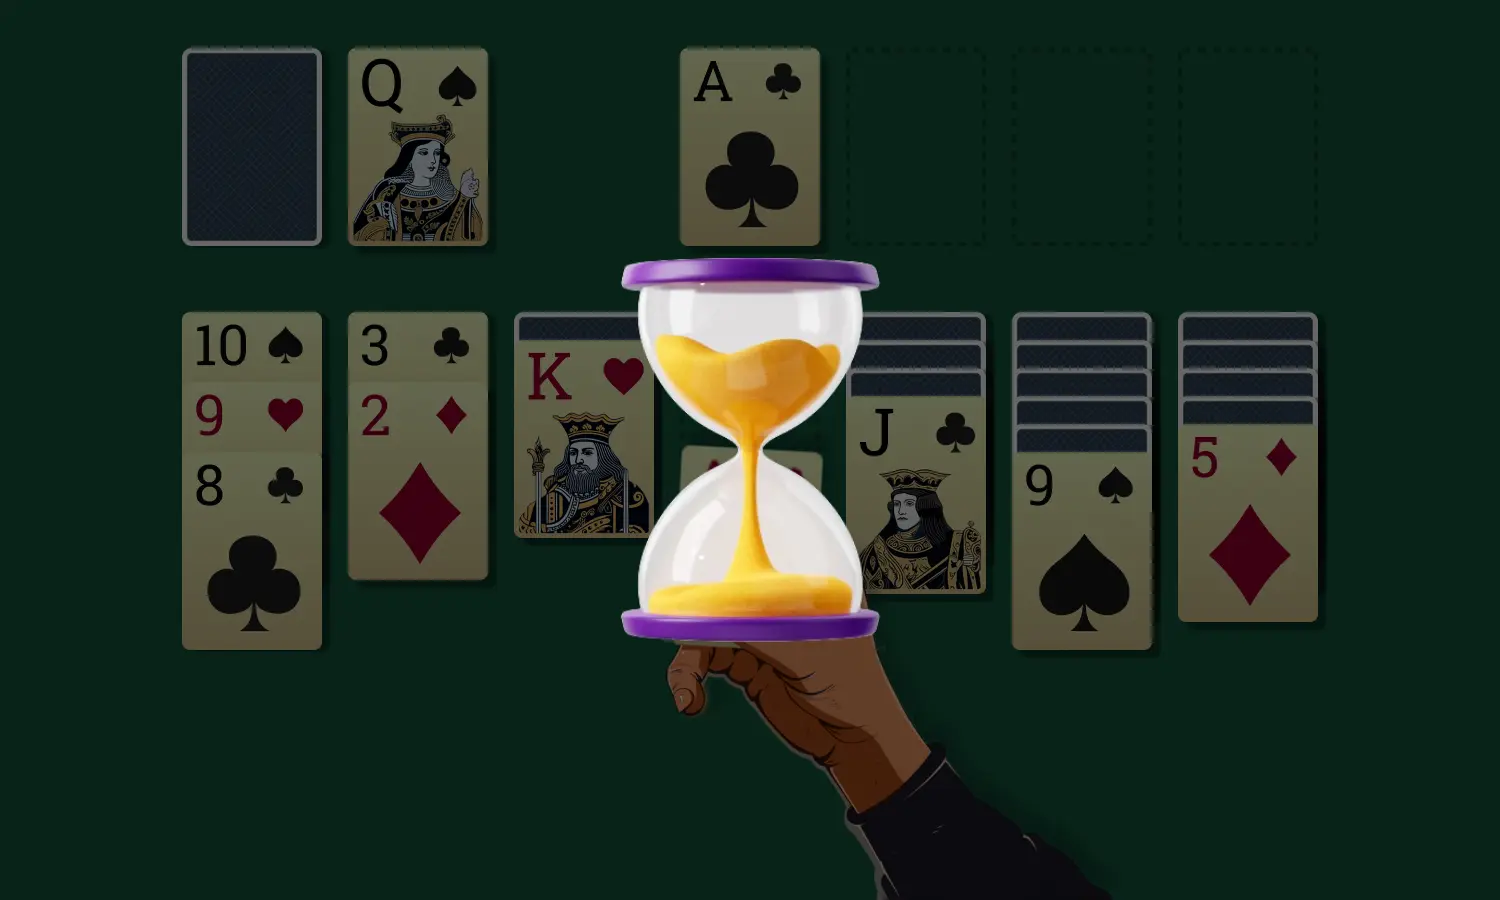 How Long Does a Game of Solitaire Take?